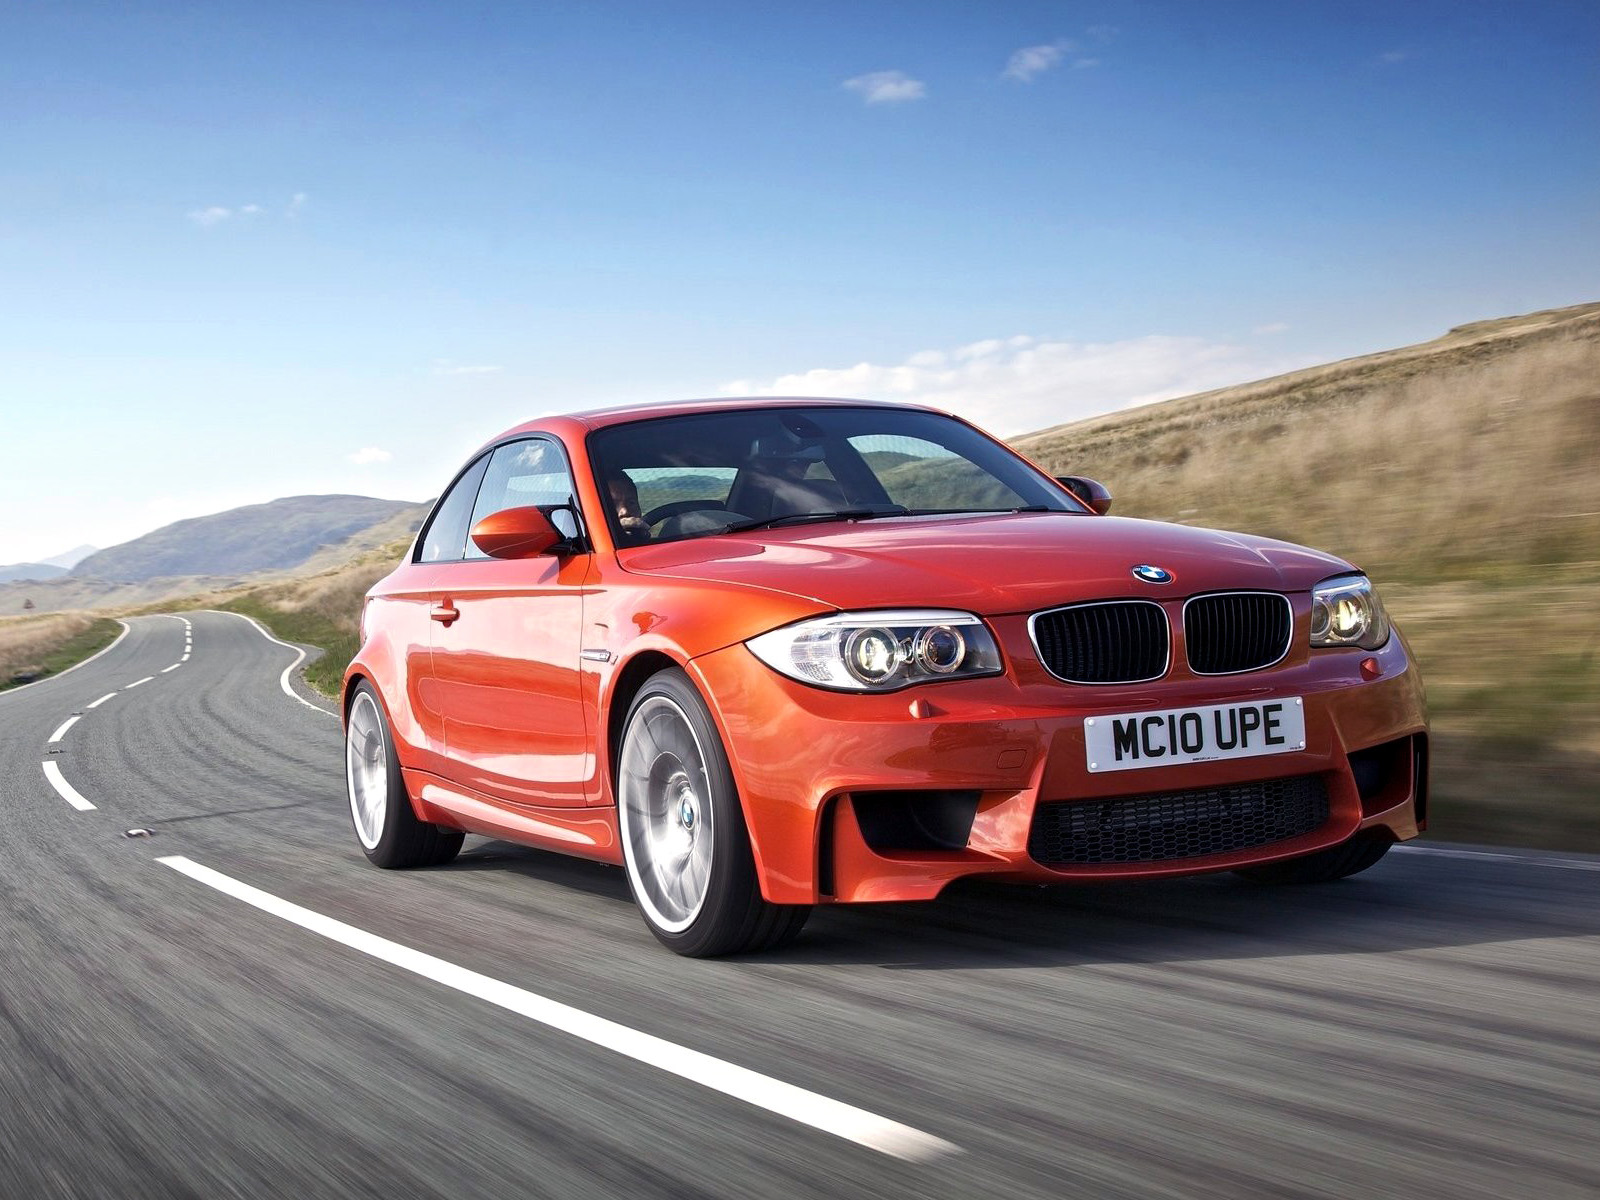 bmw, vehicles, bmw 1 series m coupe